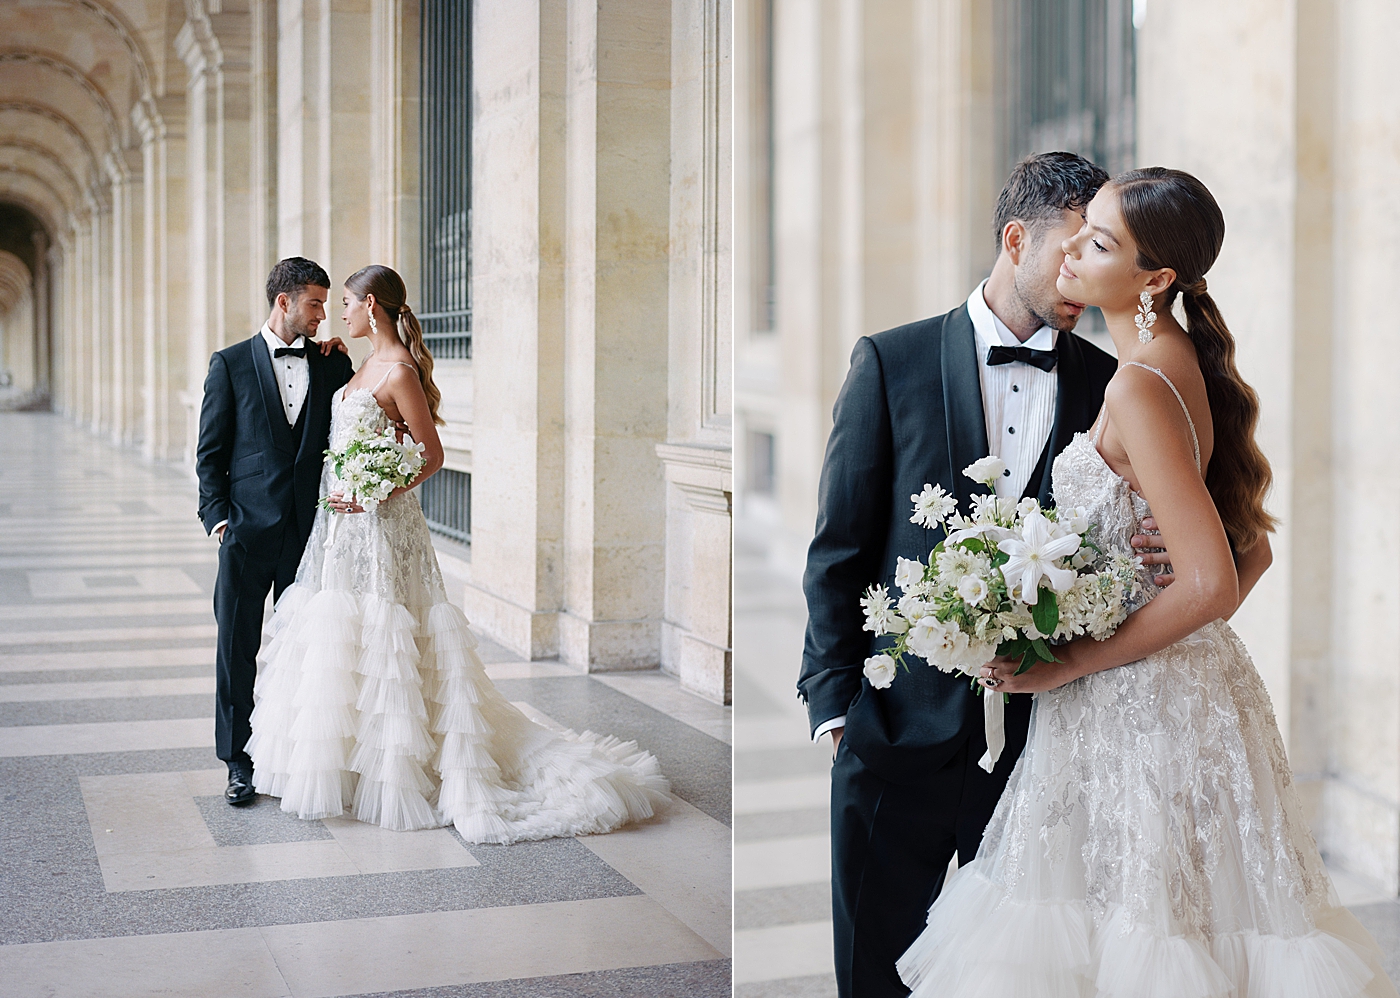 Side-by-side images of a bride and groom standing in the outside hallway of the Louvre with a bouquet | Image by Hope Helmuth Photography